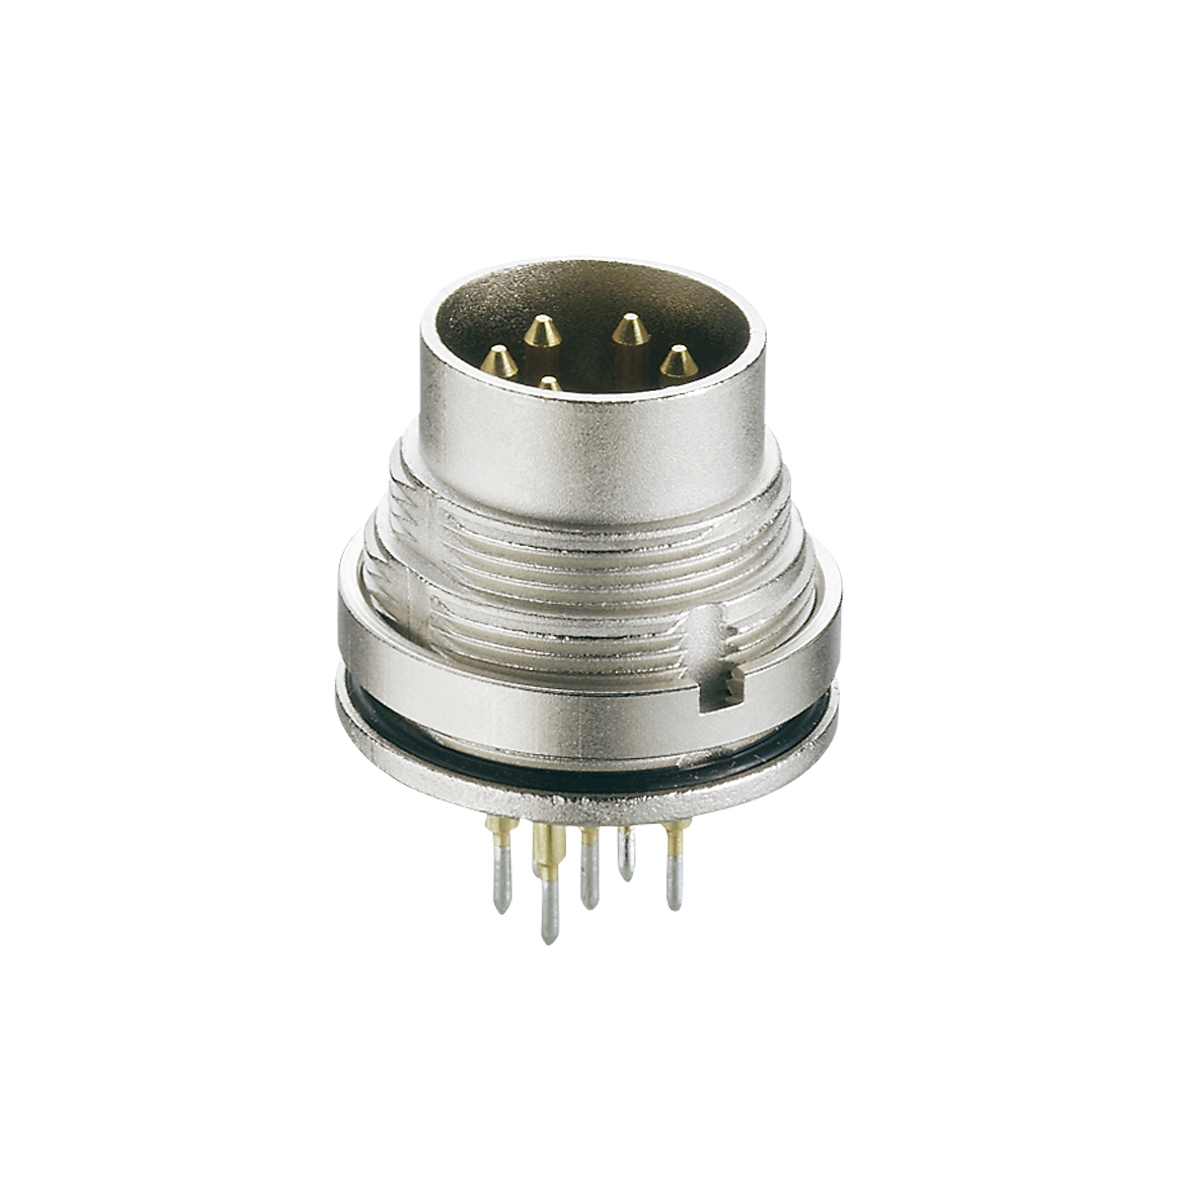 Lumberg: 317 (Series 03 | Circular connectors with threaded joint M16 acc. to IEC 61076-2-106, IP40/IP68)